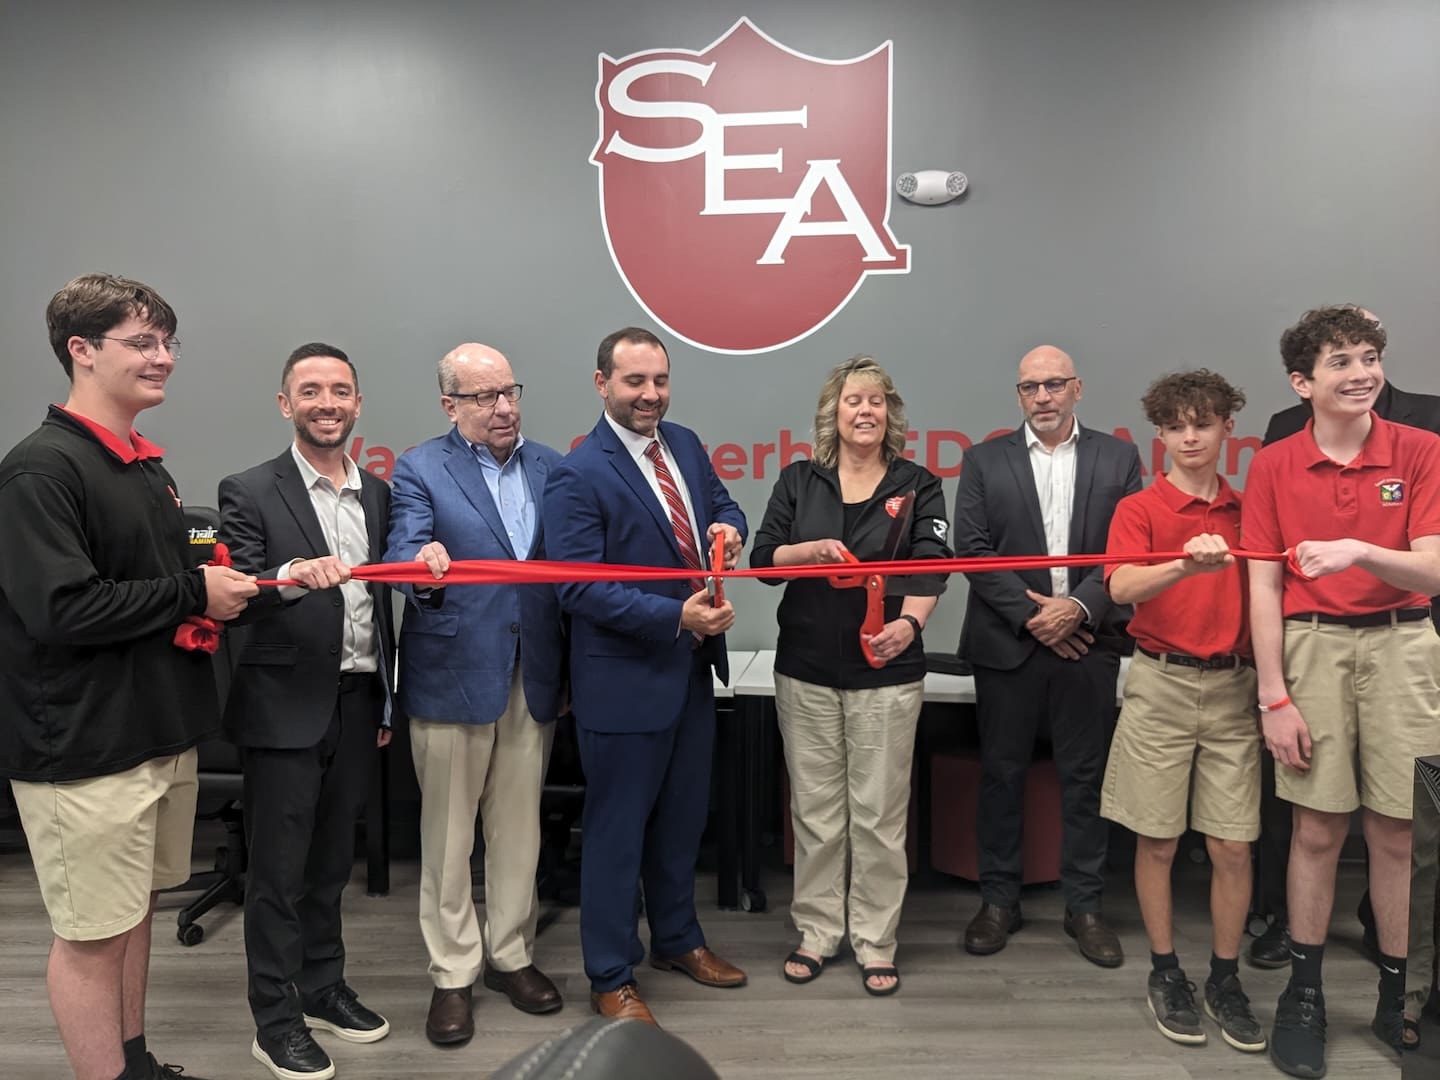 Featured image for “St. Edmond’s dedicates arena focused on STEM, gaming”